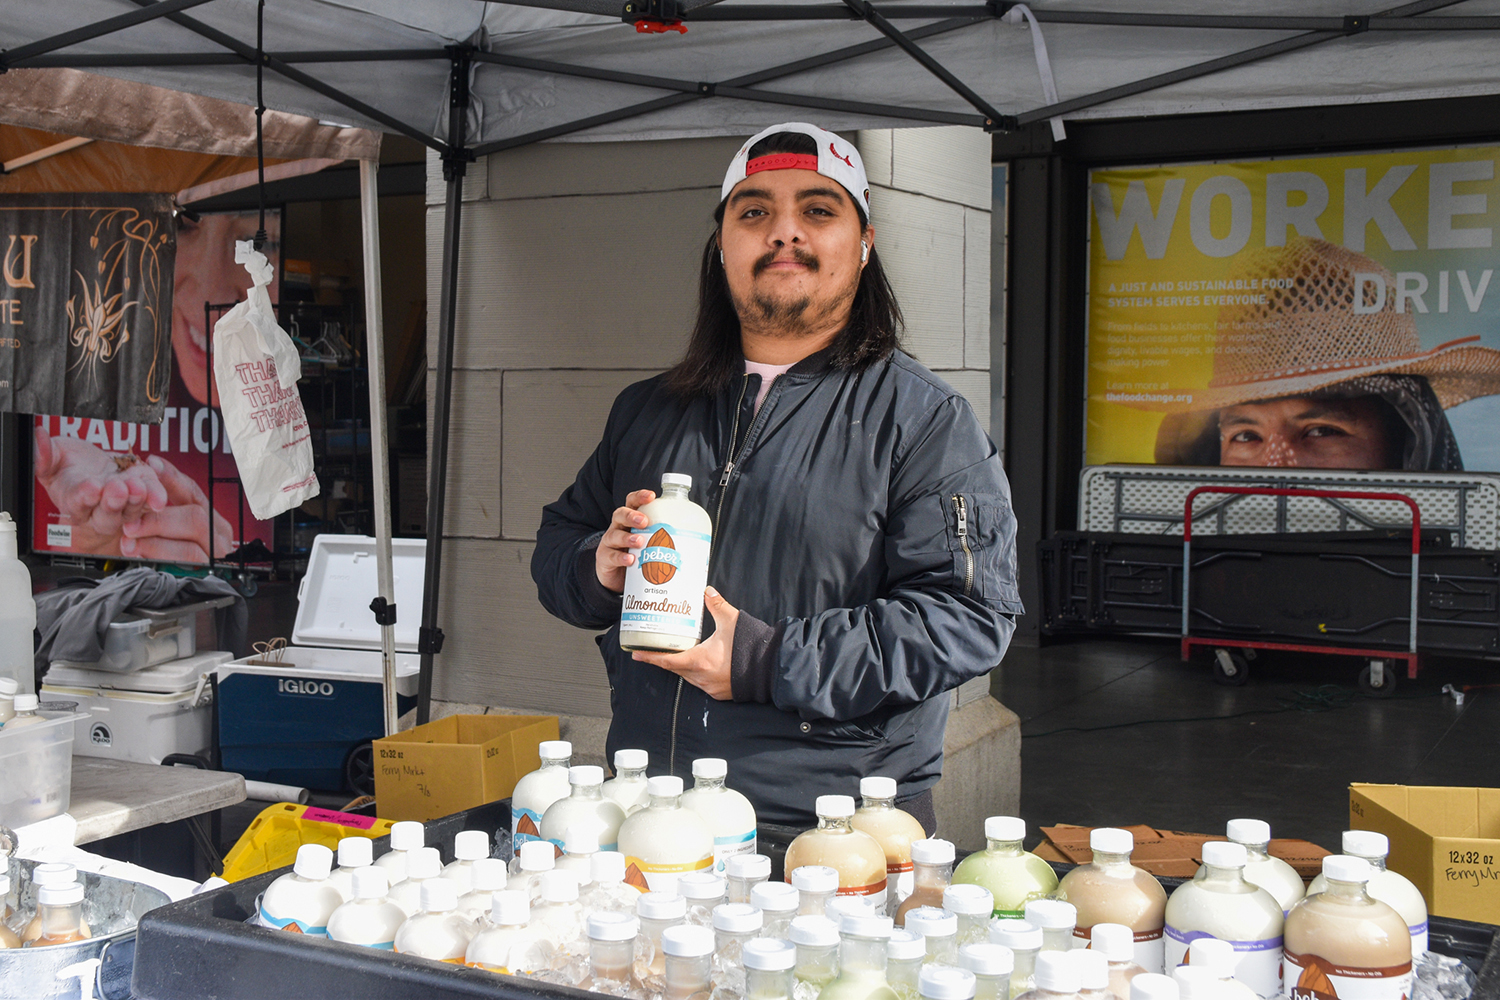 Hecter holds up a bottle of almond milk at Beber Almond Milk's farmers market stand